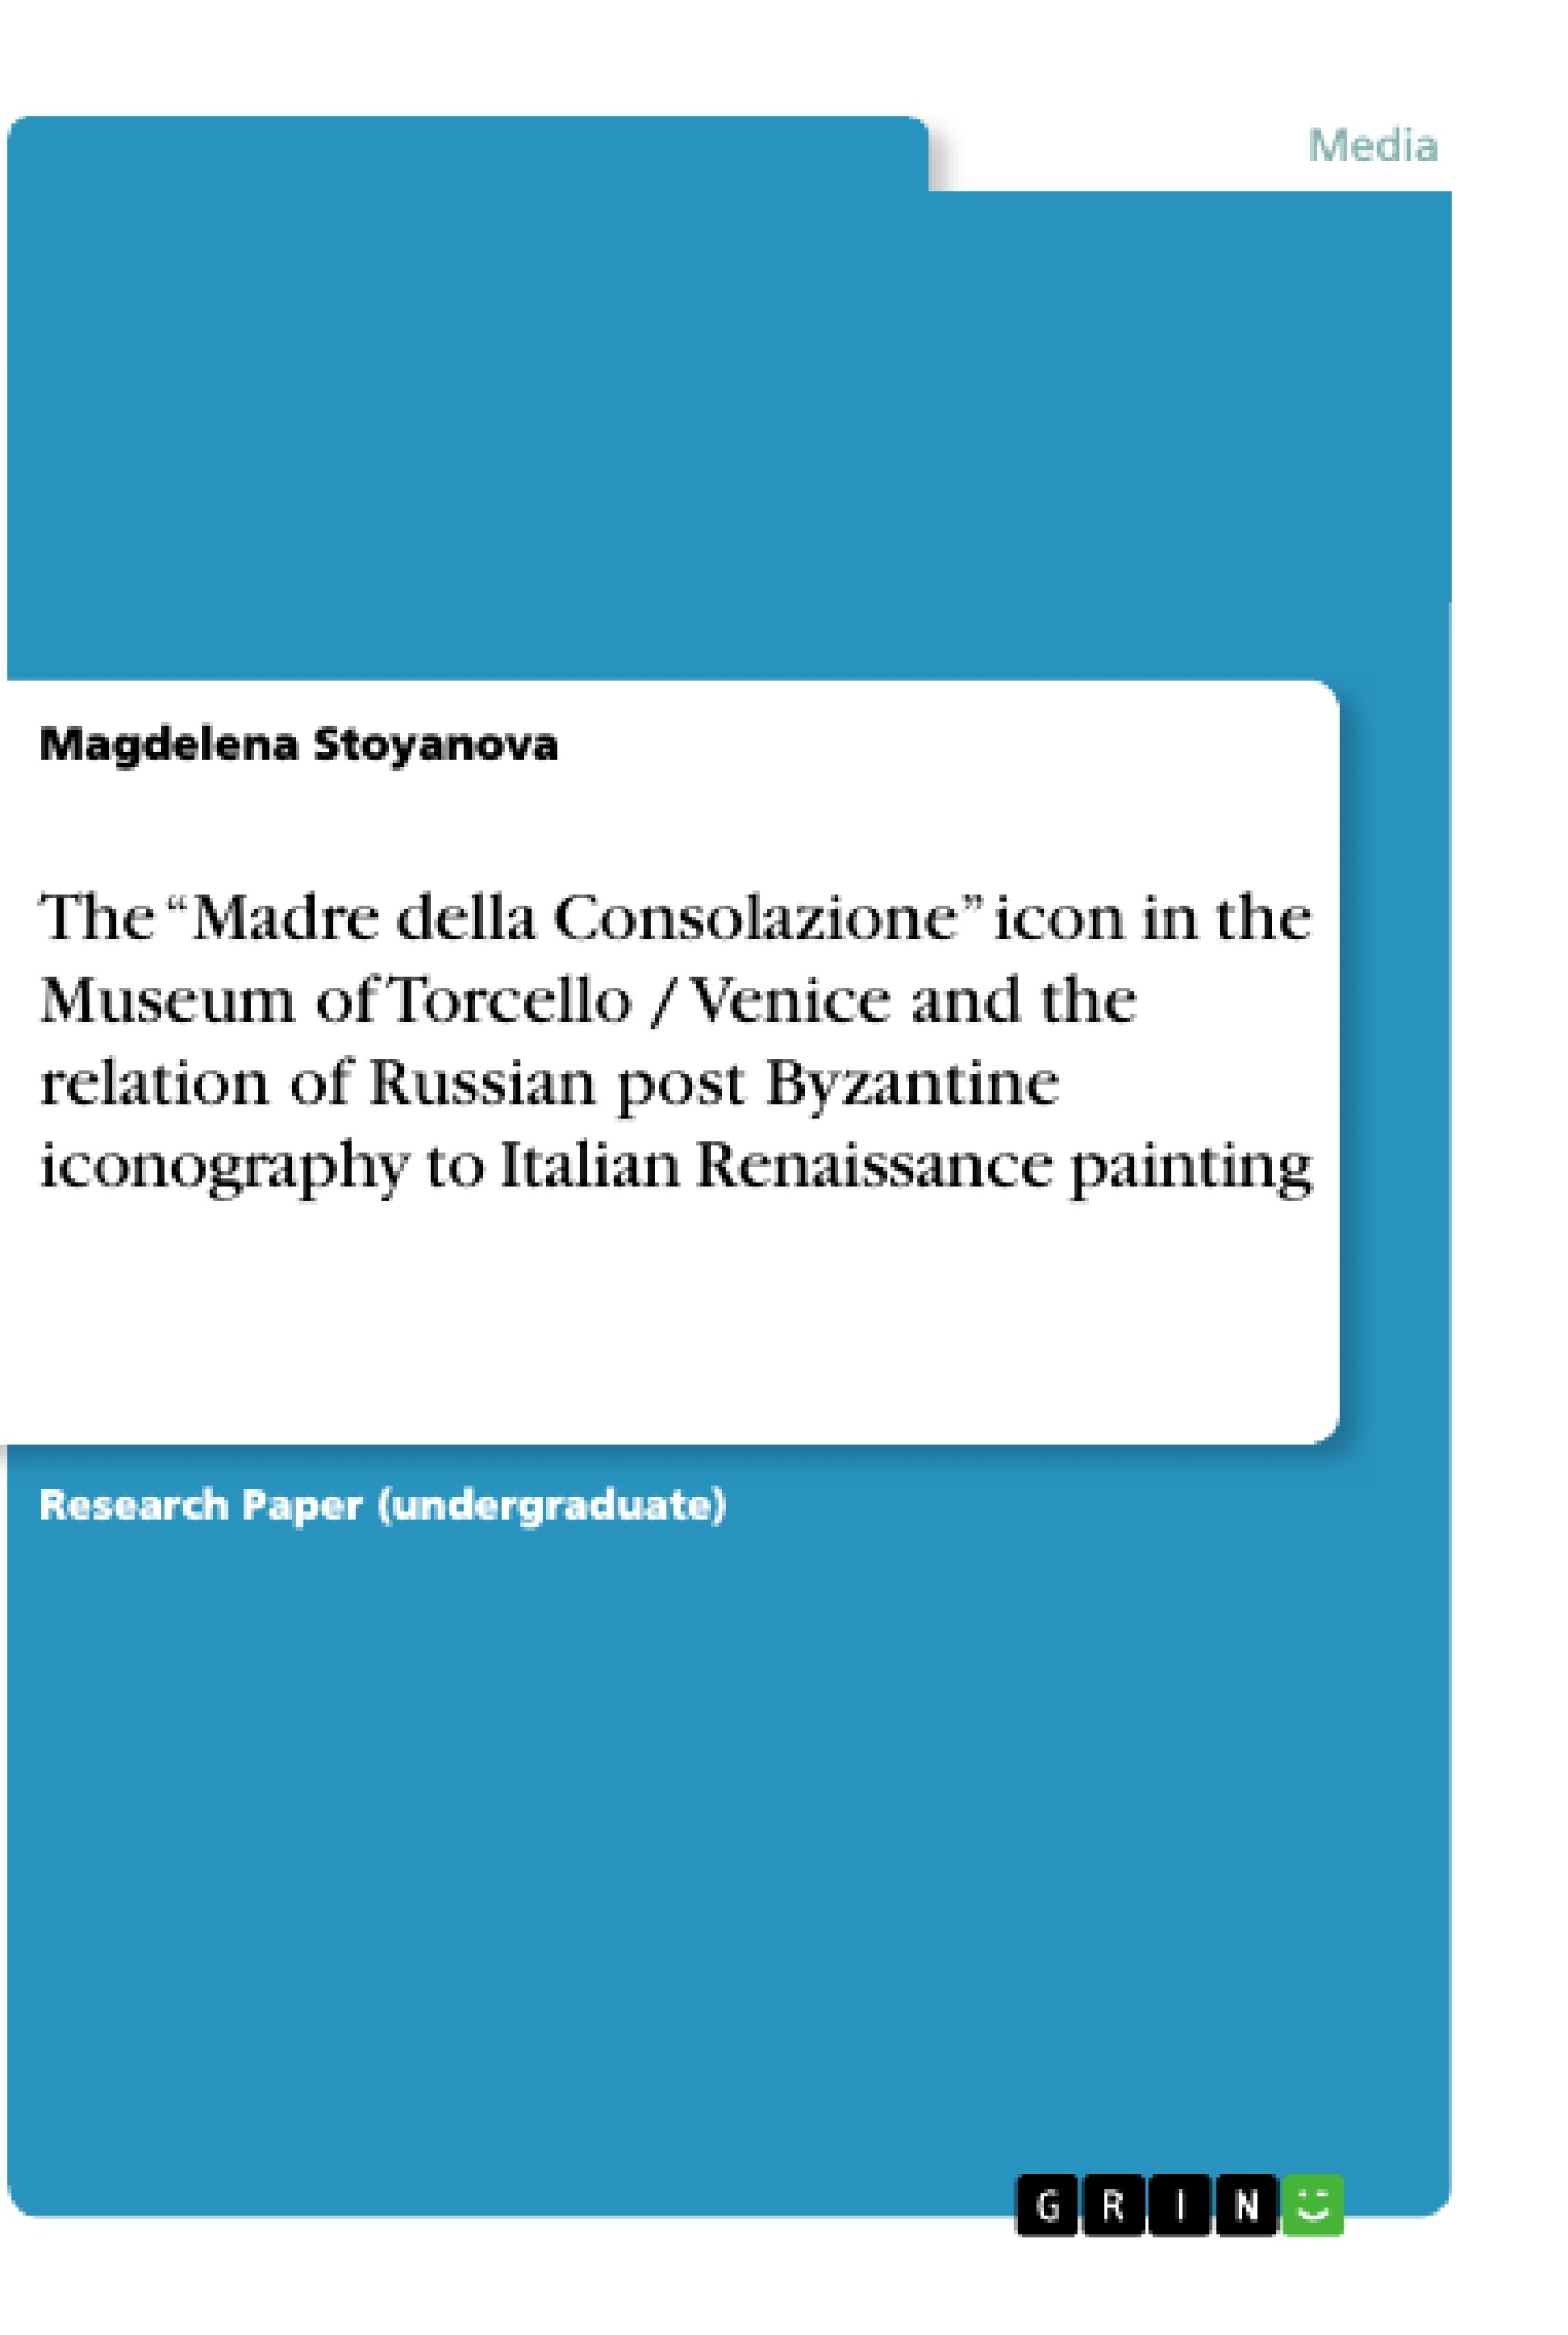 Titre: The “Madre della Consolazione” icon in the Museum of Torcello / Venice and the relation of Russian post Byzantine iconography to Italian Renaissance painting